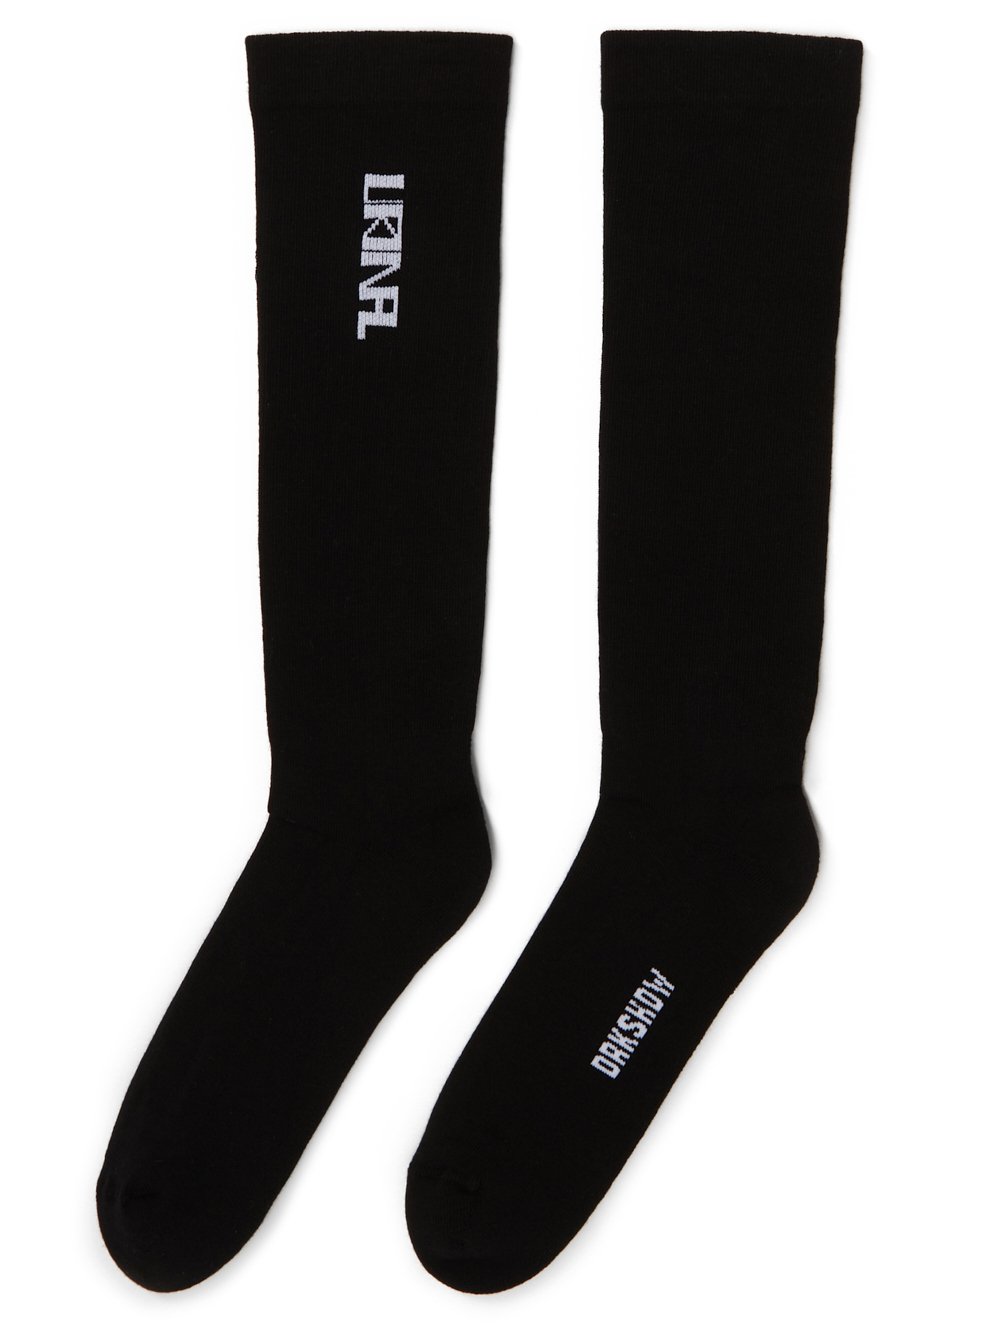 RICK OWENS FW23 LUXOR URINAL SOCKS IN BLACK AND MILK COTTON KNIT